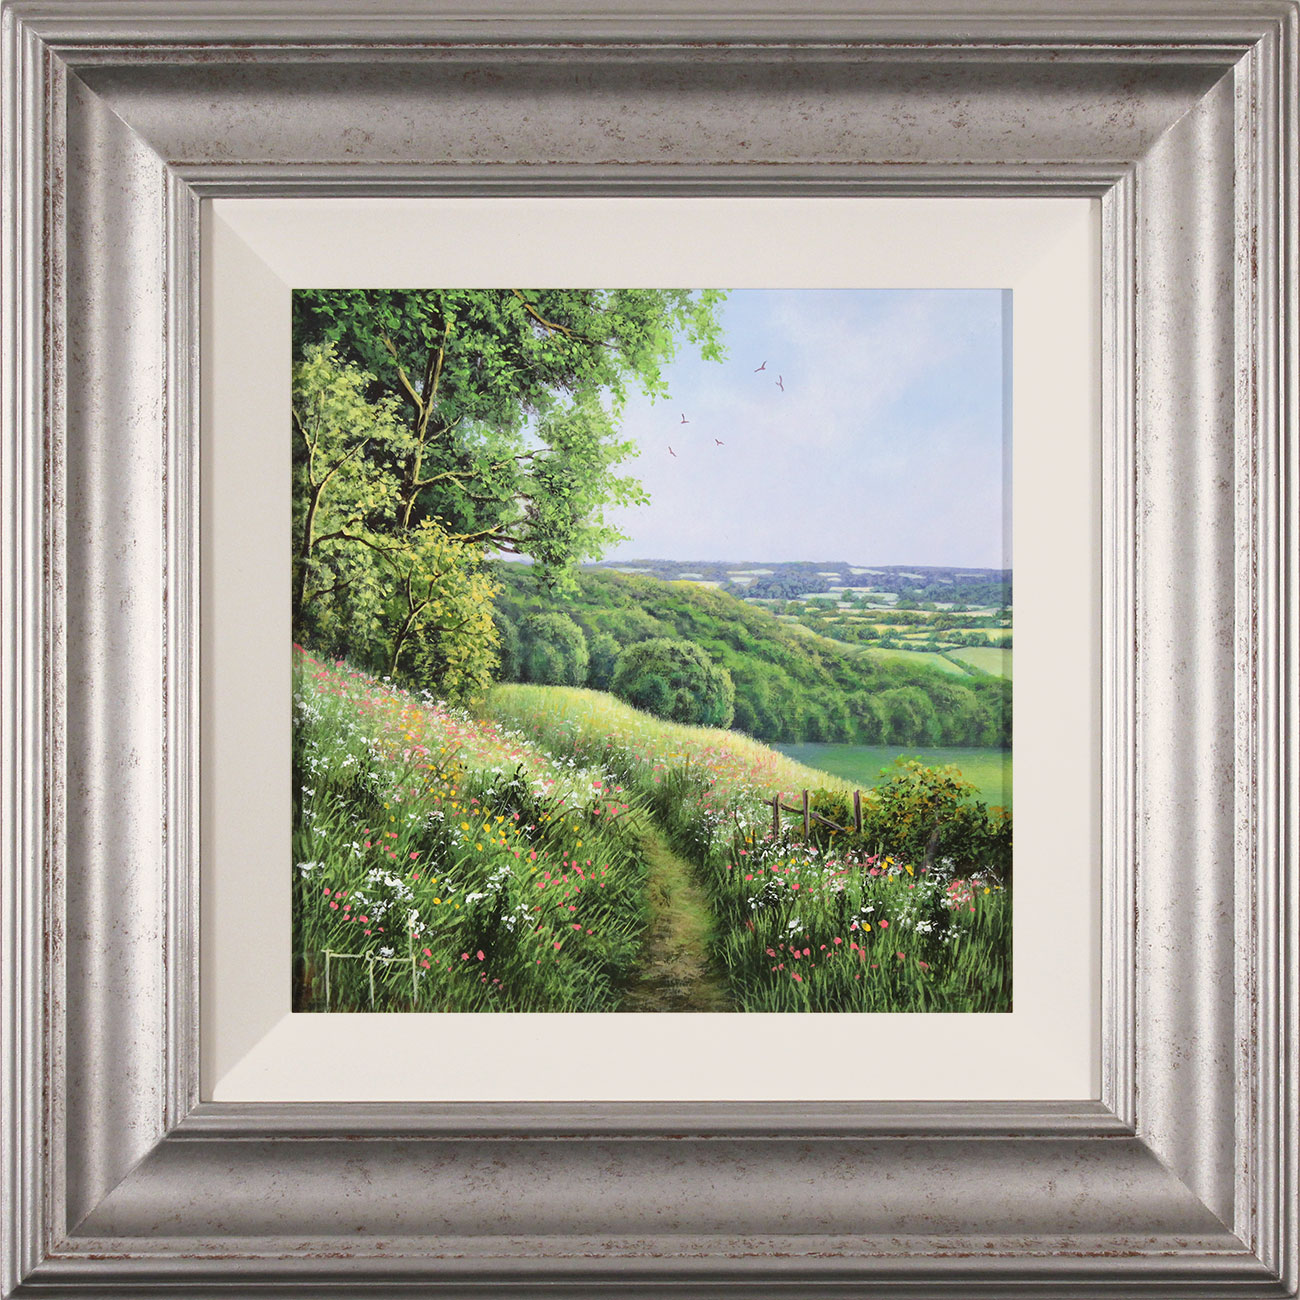 Terry Grundy, Original oil painting on panel, Summer in the Yorkshire Wolds. Click to enlarge